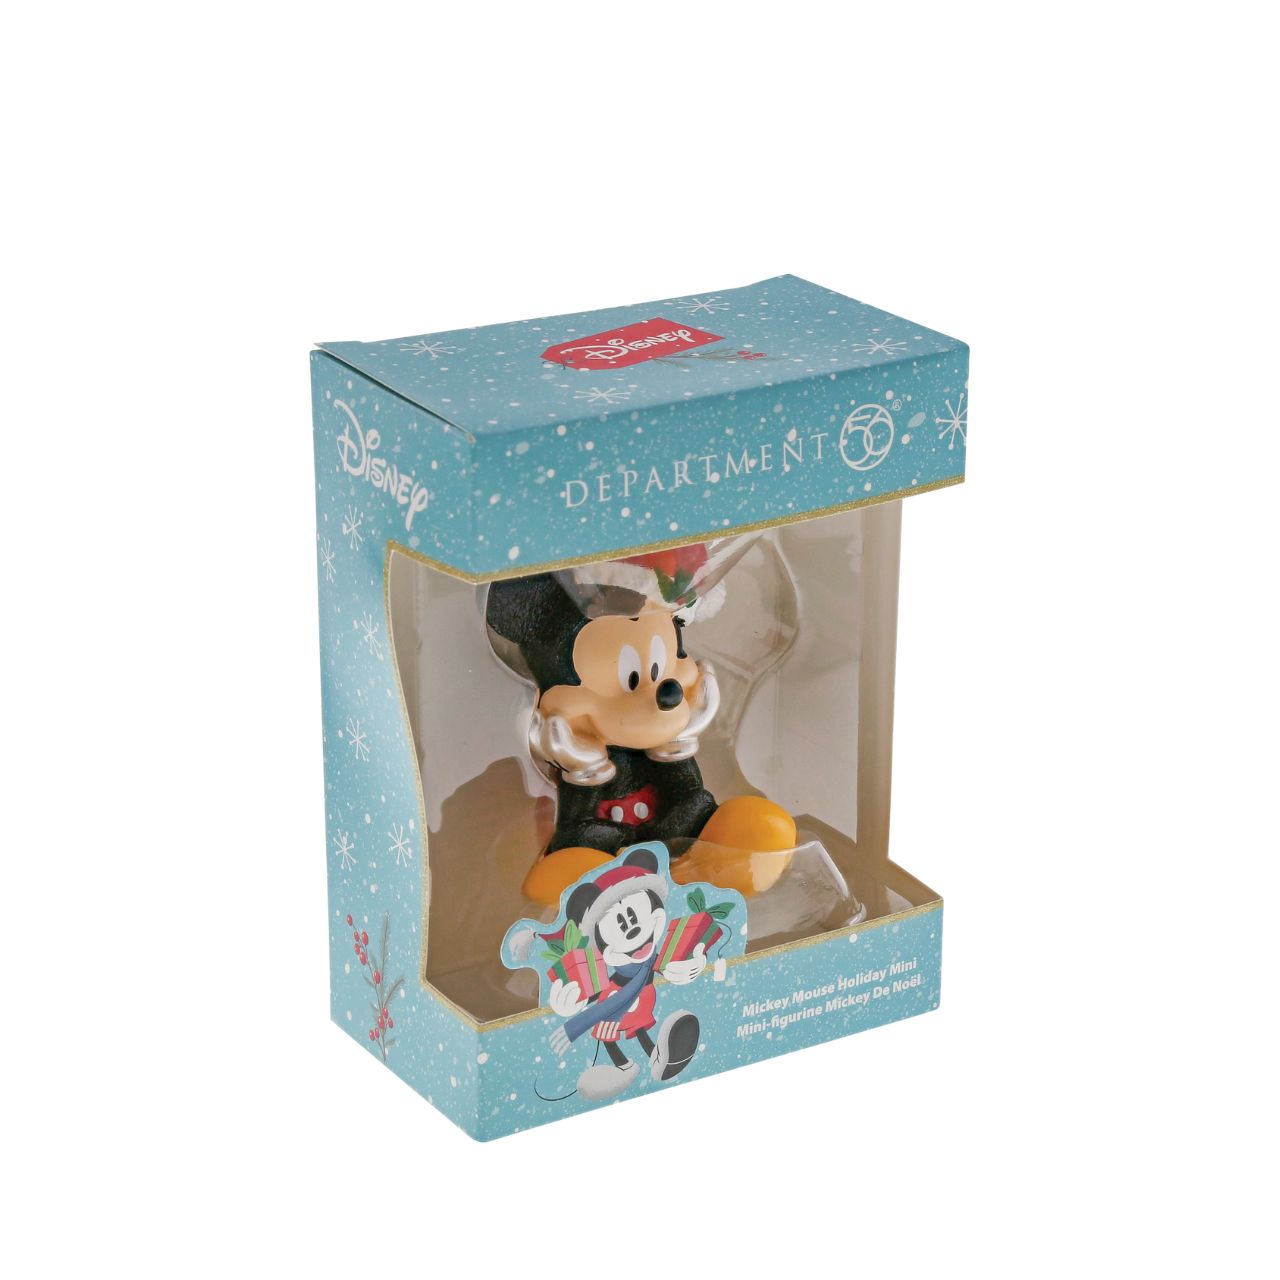 Department 56 Disney Christmas Mickey Mouse Figurine  Positively jolly, Mickey Mouse excitedly sits in this beautiful Christmas figure from Disney. With a song in his heart and holly in his hat, Mickey prepares to spend the season smiling. This is one mouse that won't be silent throughout the house.